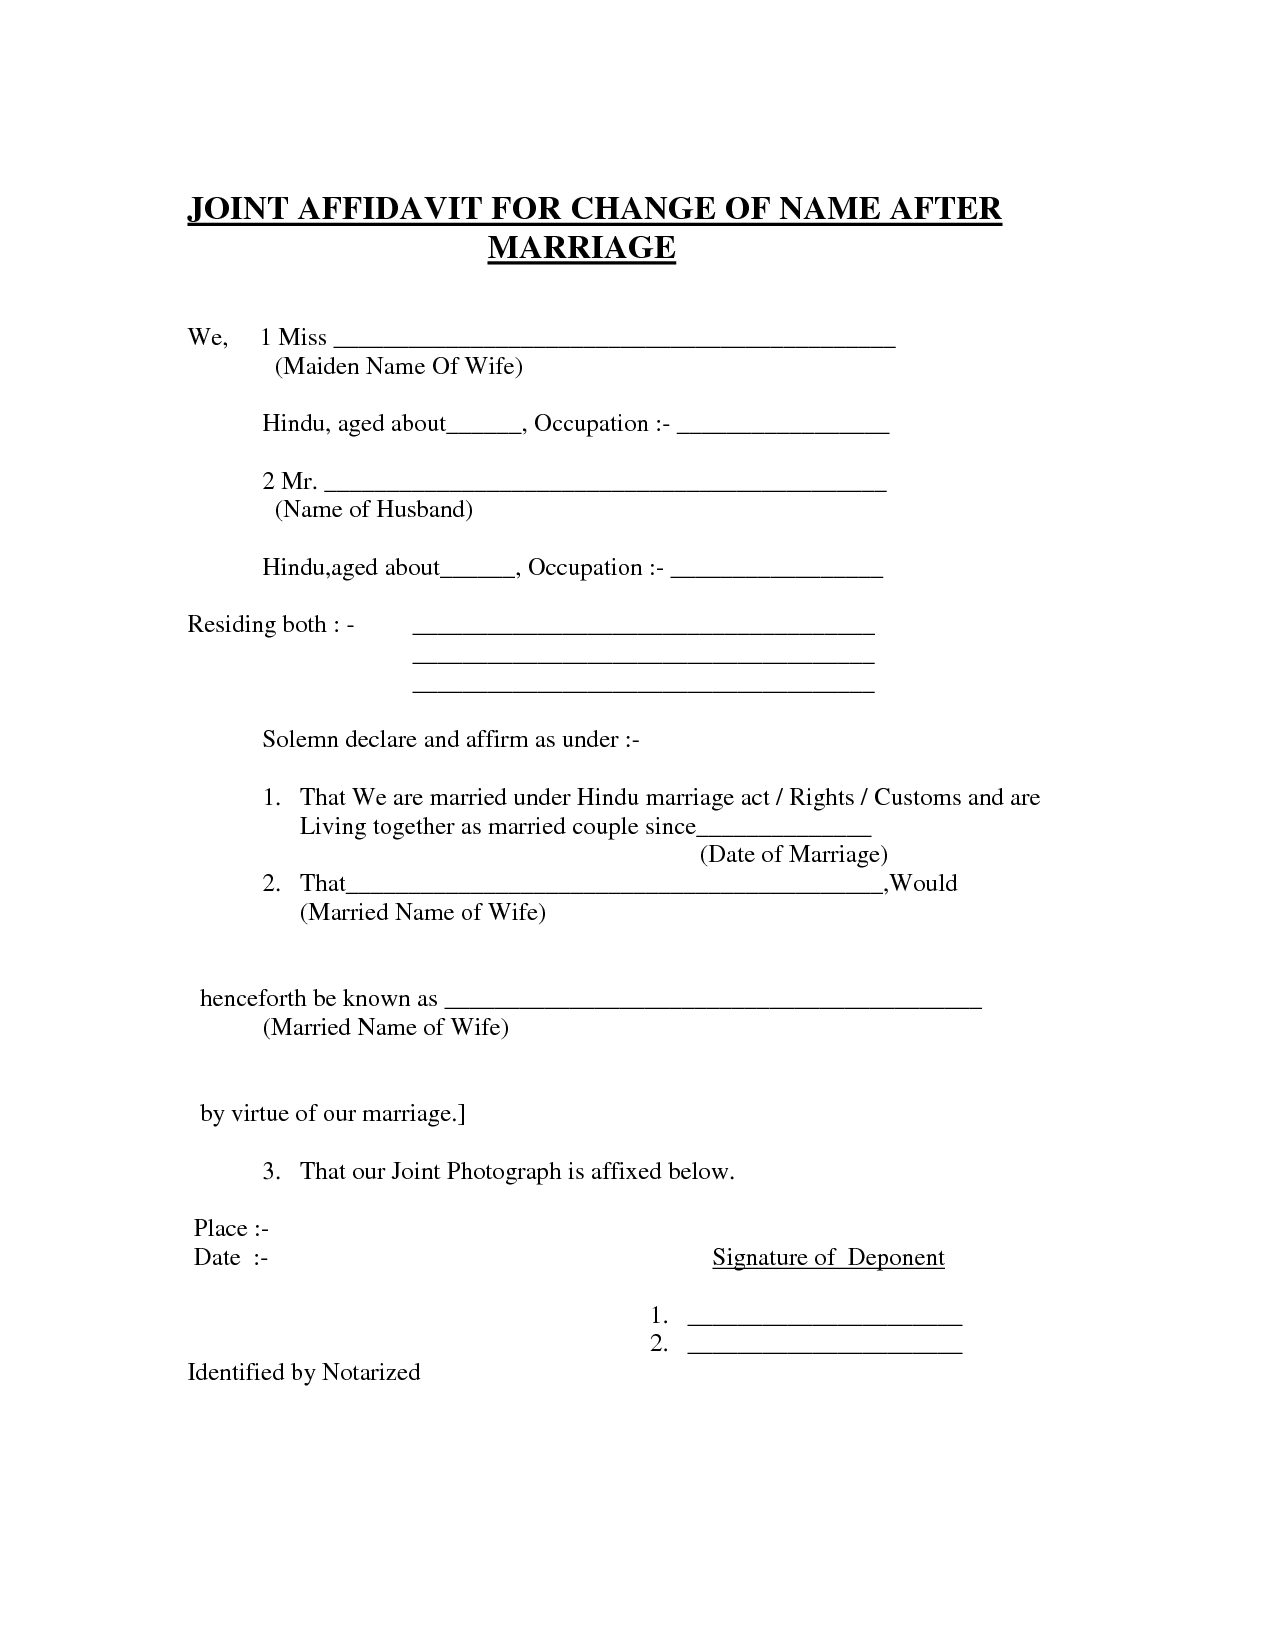 Forms Sample Forms After Marriage Name Change Marriage